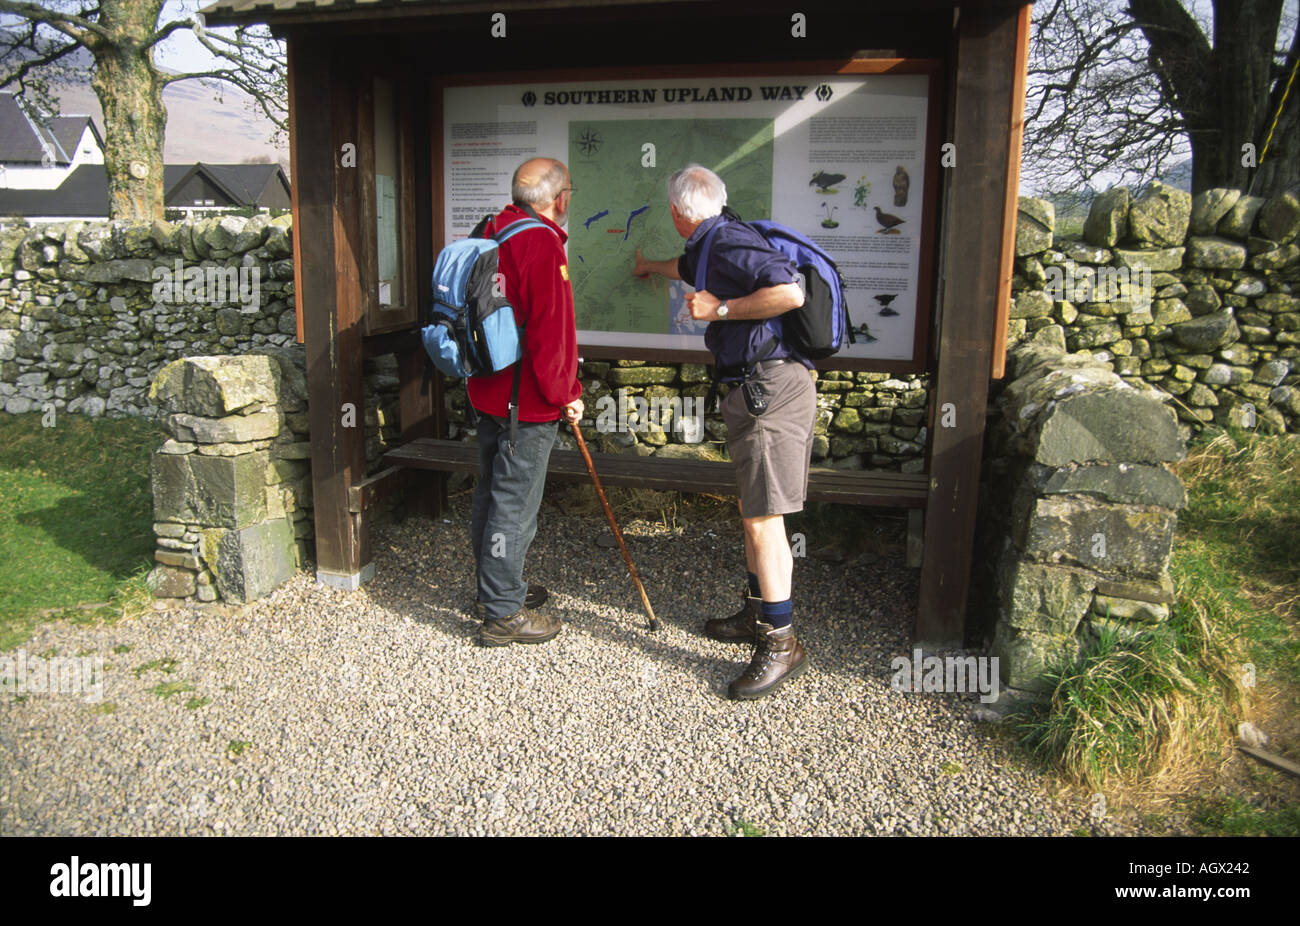 Two walkers on Southern Upland Way St Marys Loch Tibbie Shiels Inn looking at notice board Stock Photo